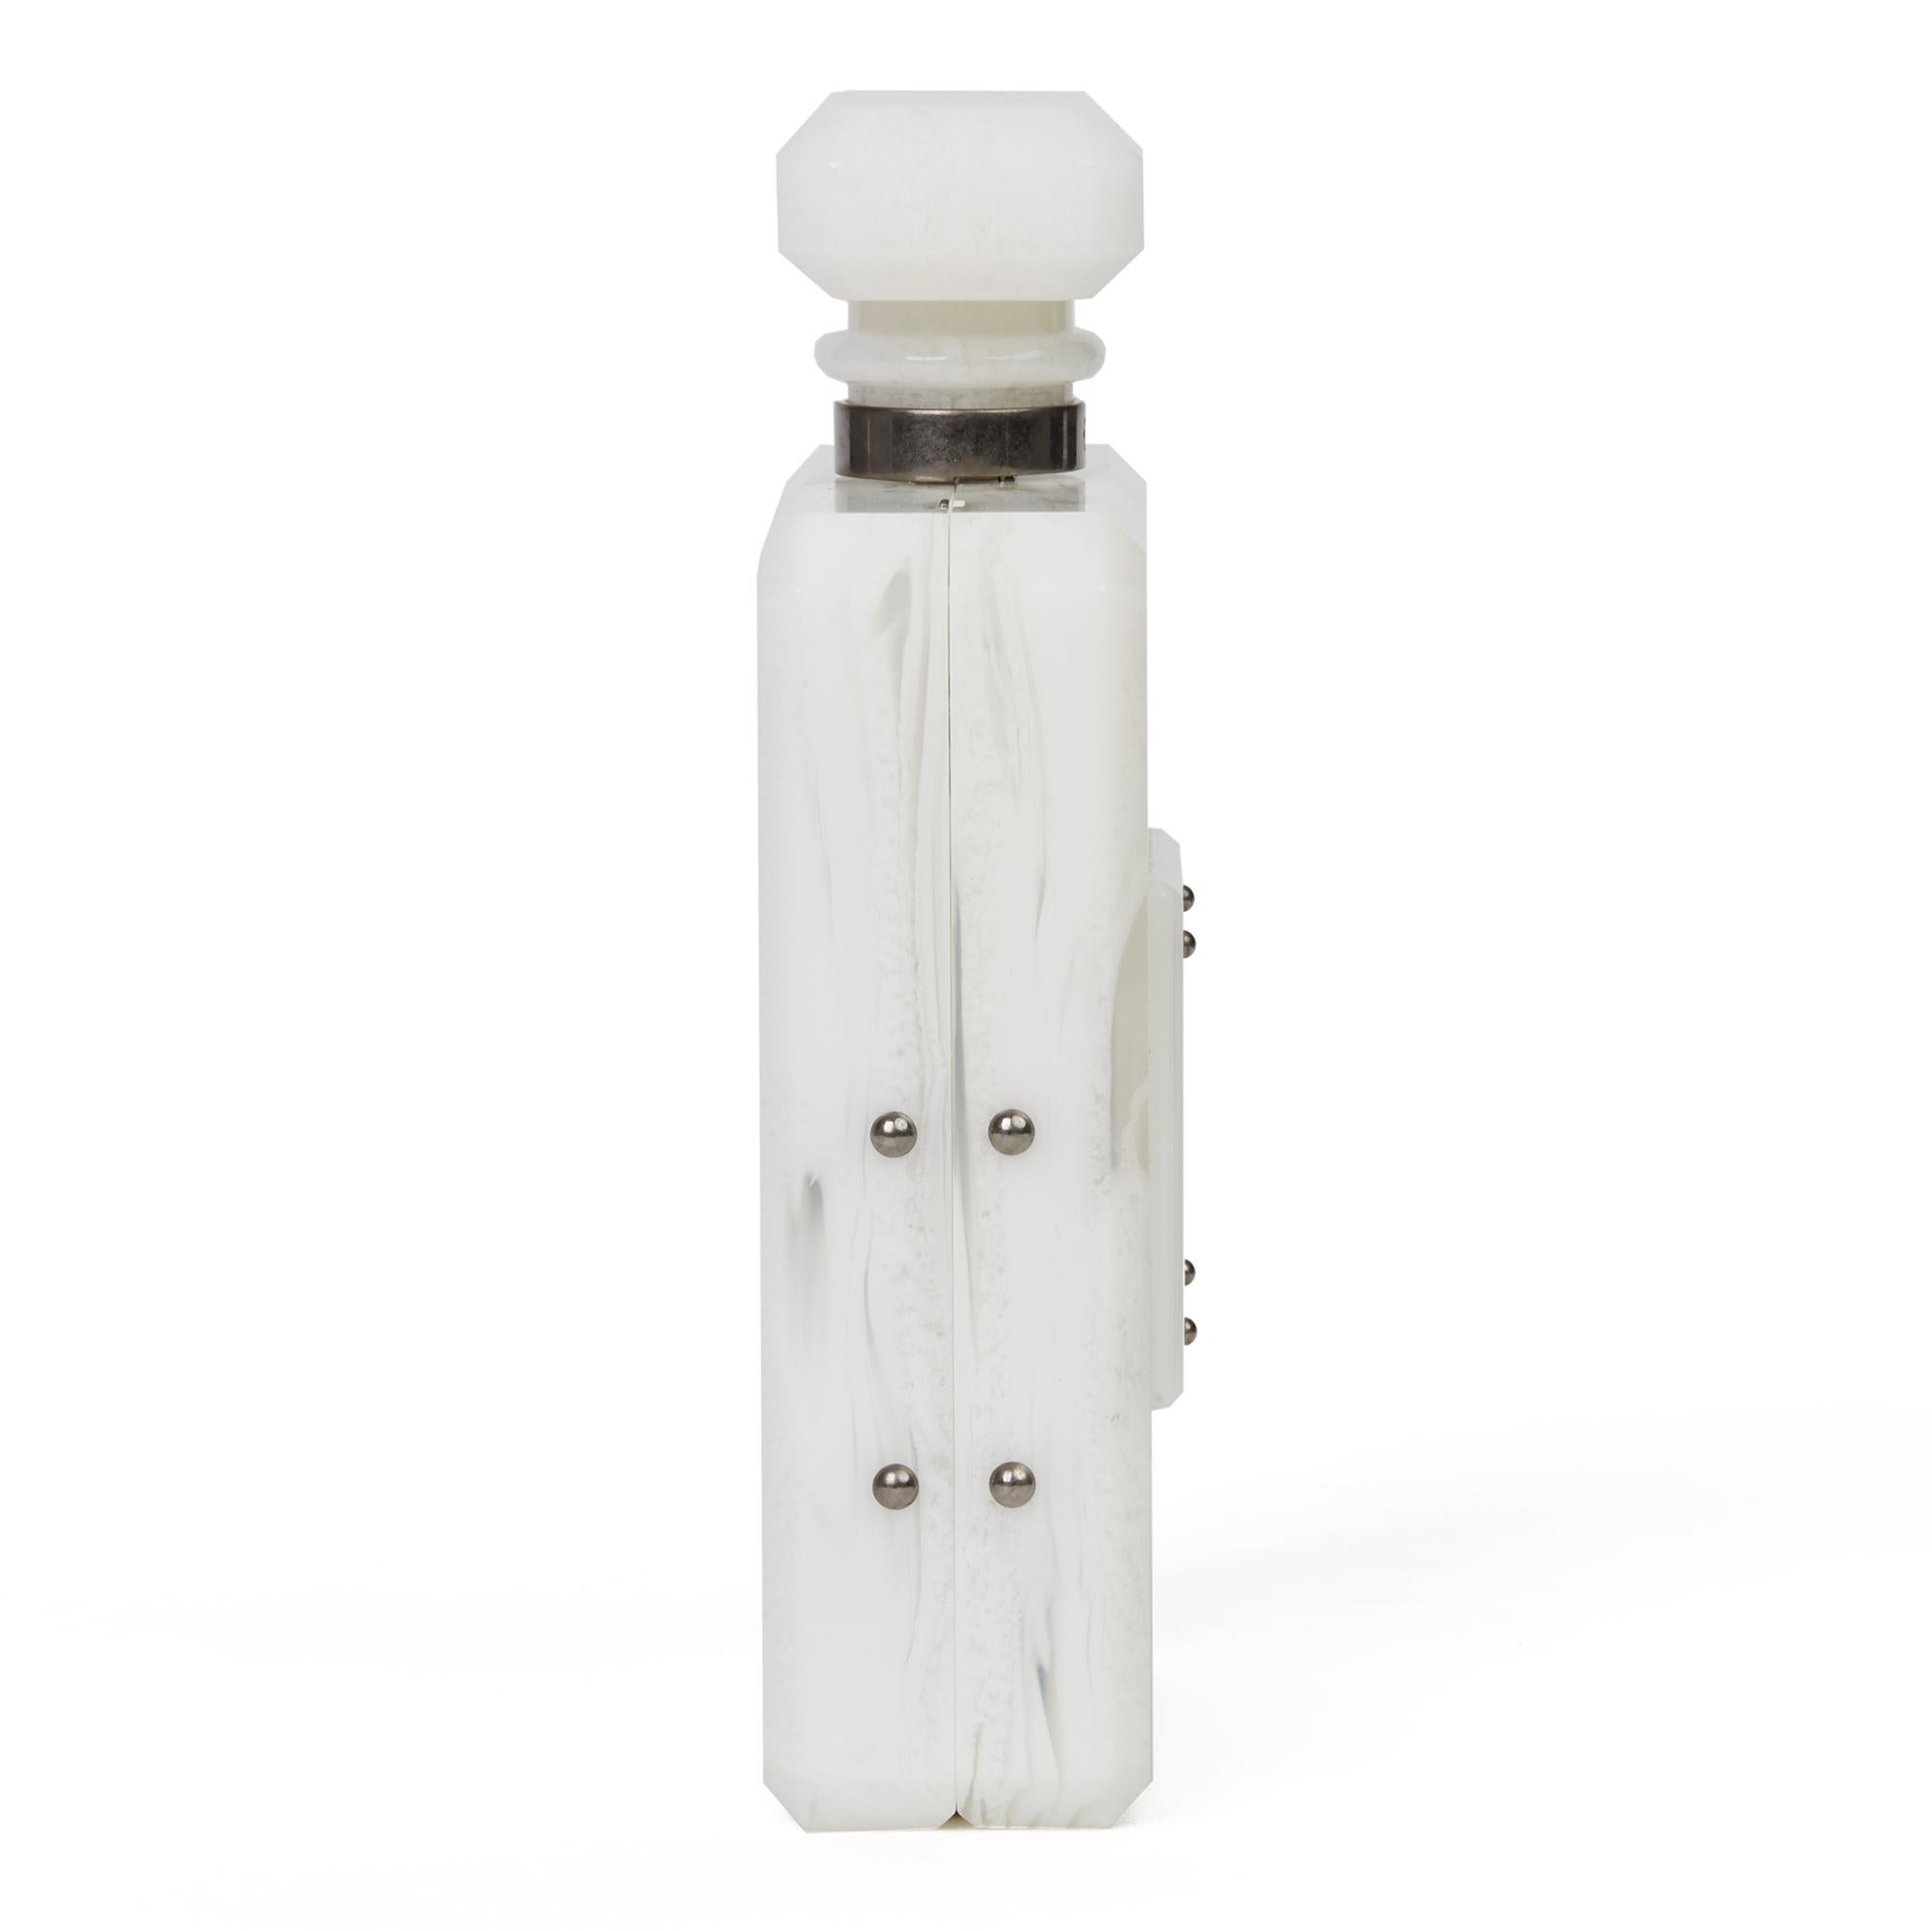 CHANEL
White Marble Plexiglass Paris-Rome Perfume Bottle Bag

Serial Number: 23076004
Age (Circa): 2016
Accompanied By: Chanel Dust Bag, Box, Authenticity Card,
Authenticity Details: Serial Sticker, Authenticity Card (Made in France)
Gender: